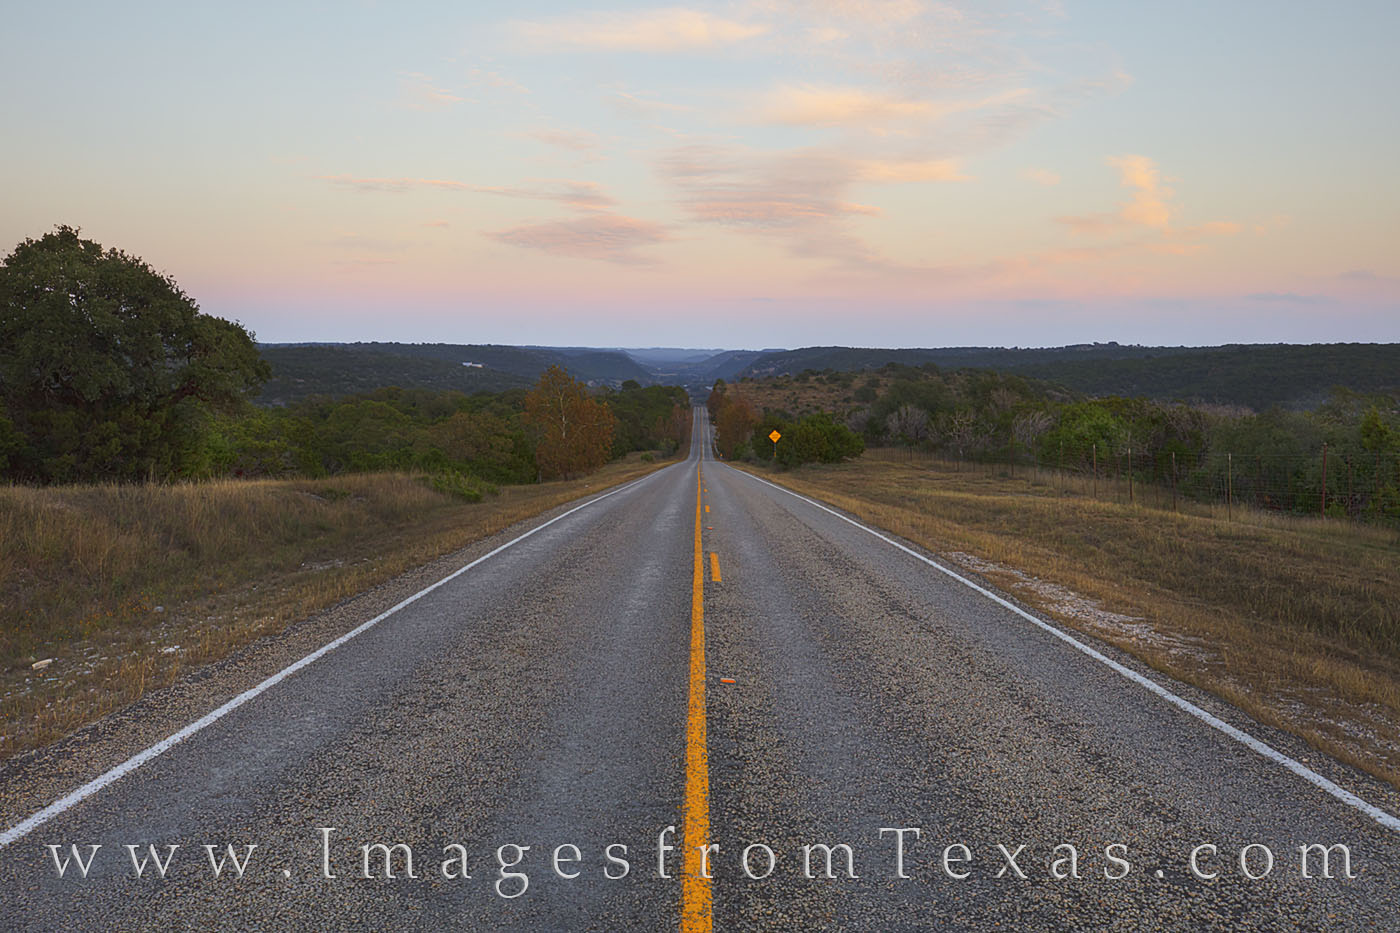 Farm to Market Road 337 runs between Vanderpool and Medina in the Texas Hill Country. This is one hill that faces east and shows...